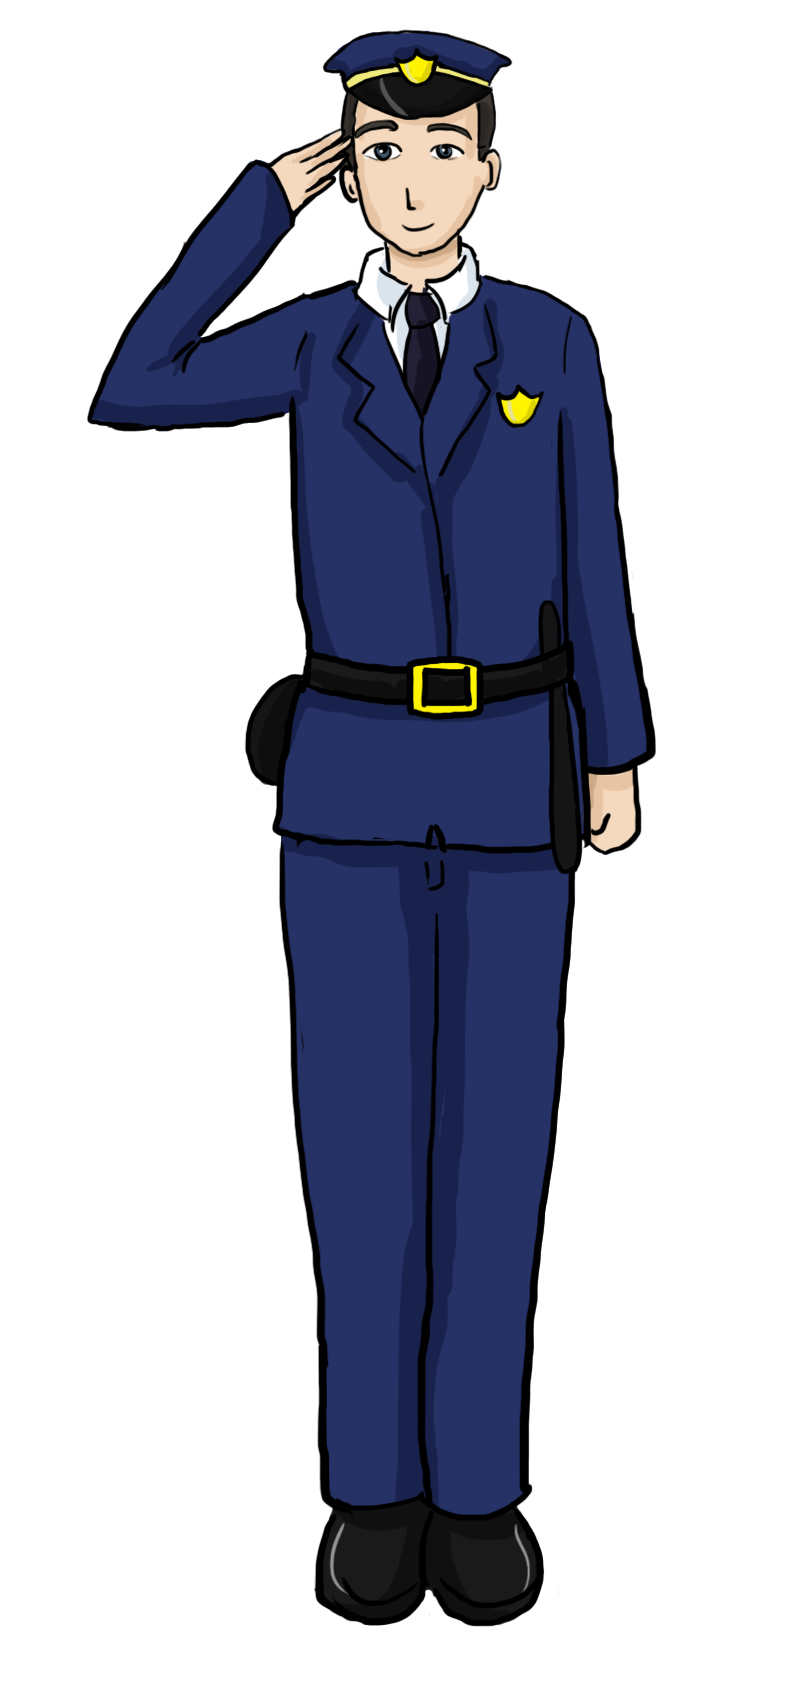 Clip art police officer uniform clipart 2 wikiclipart